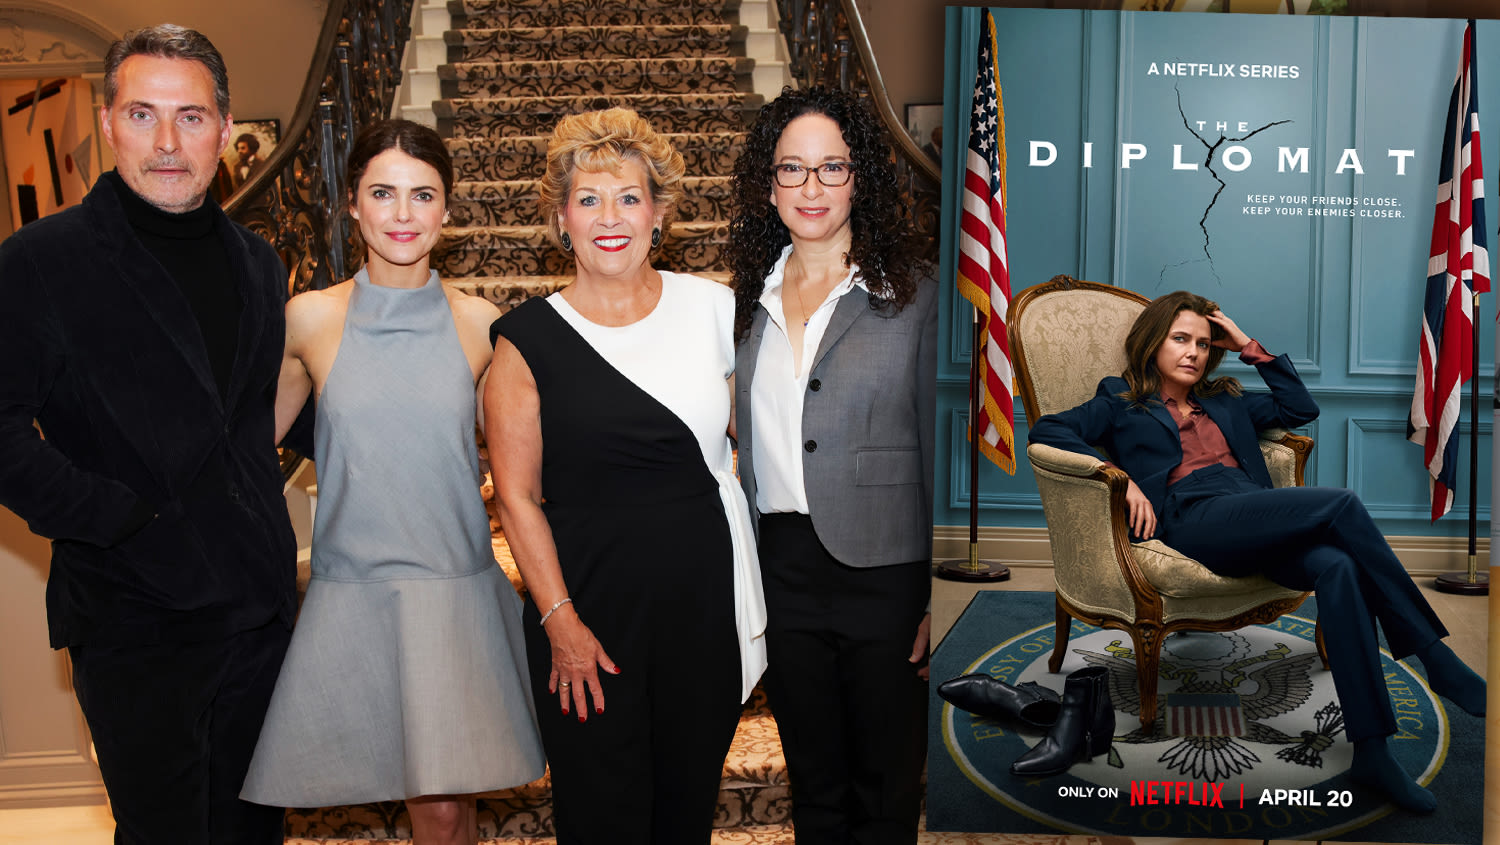 ‘The Diplomat’ Creator And Cast Meet A Real-Life Counterpart To Talk About Netflix Series’ Blend Of High...